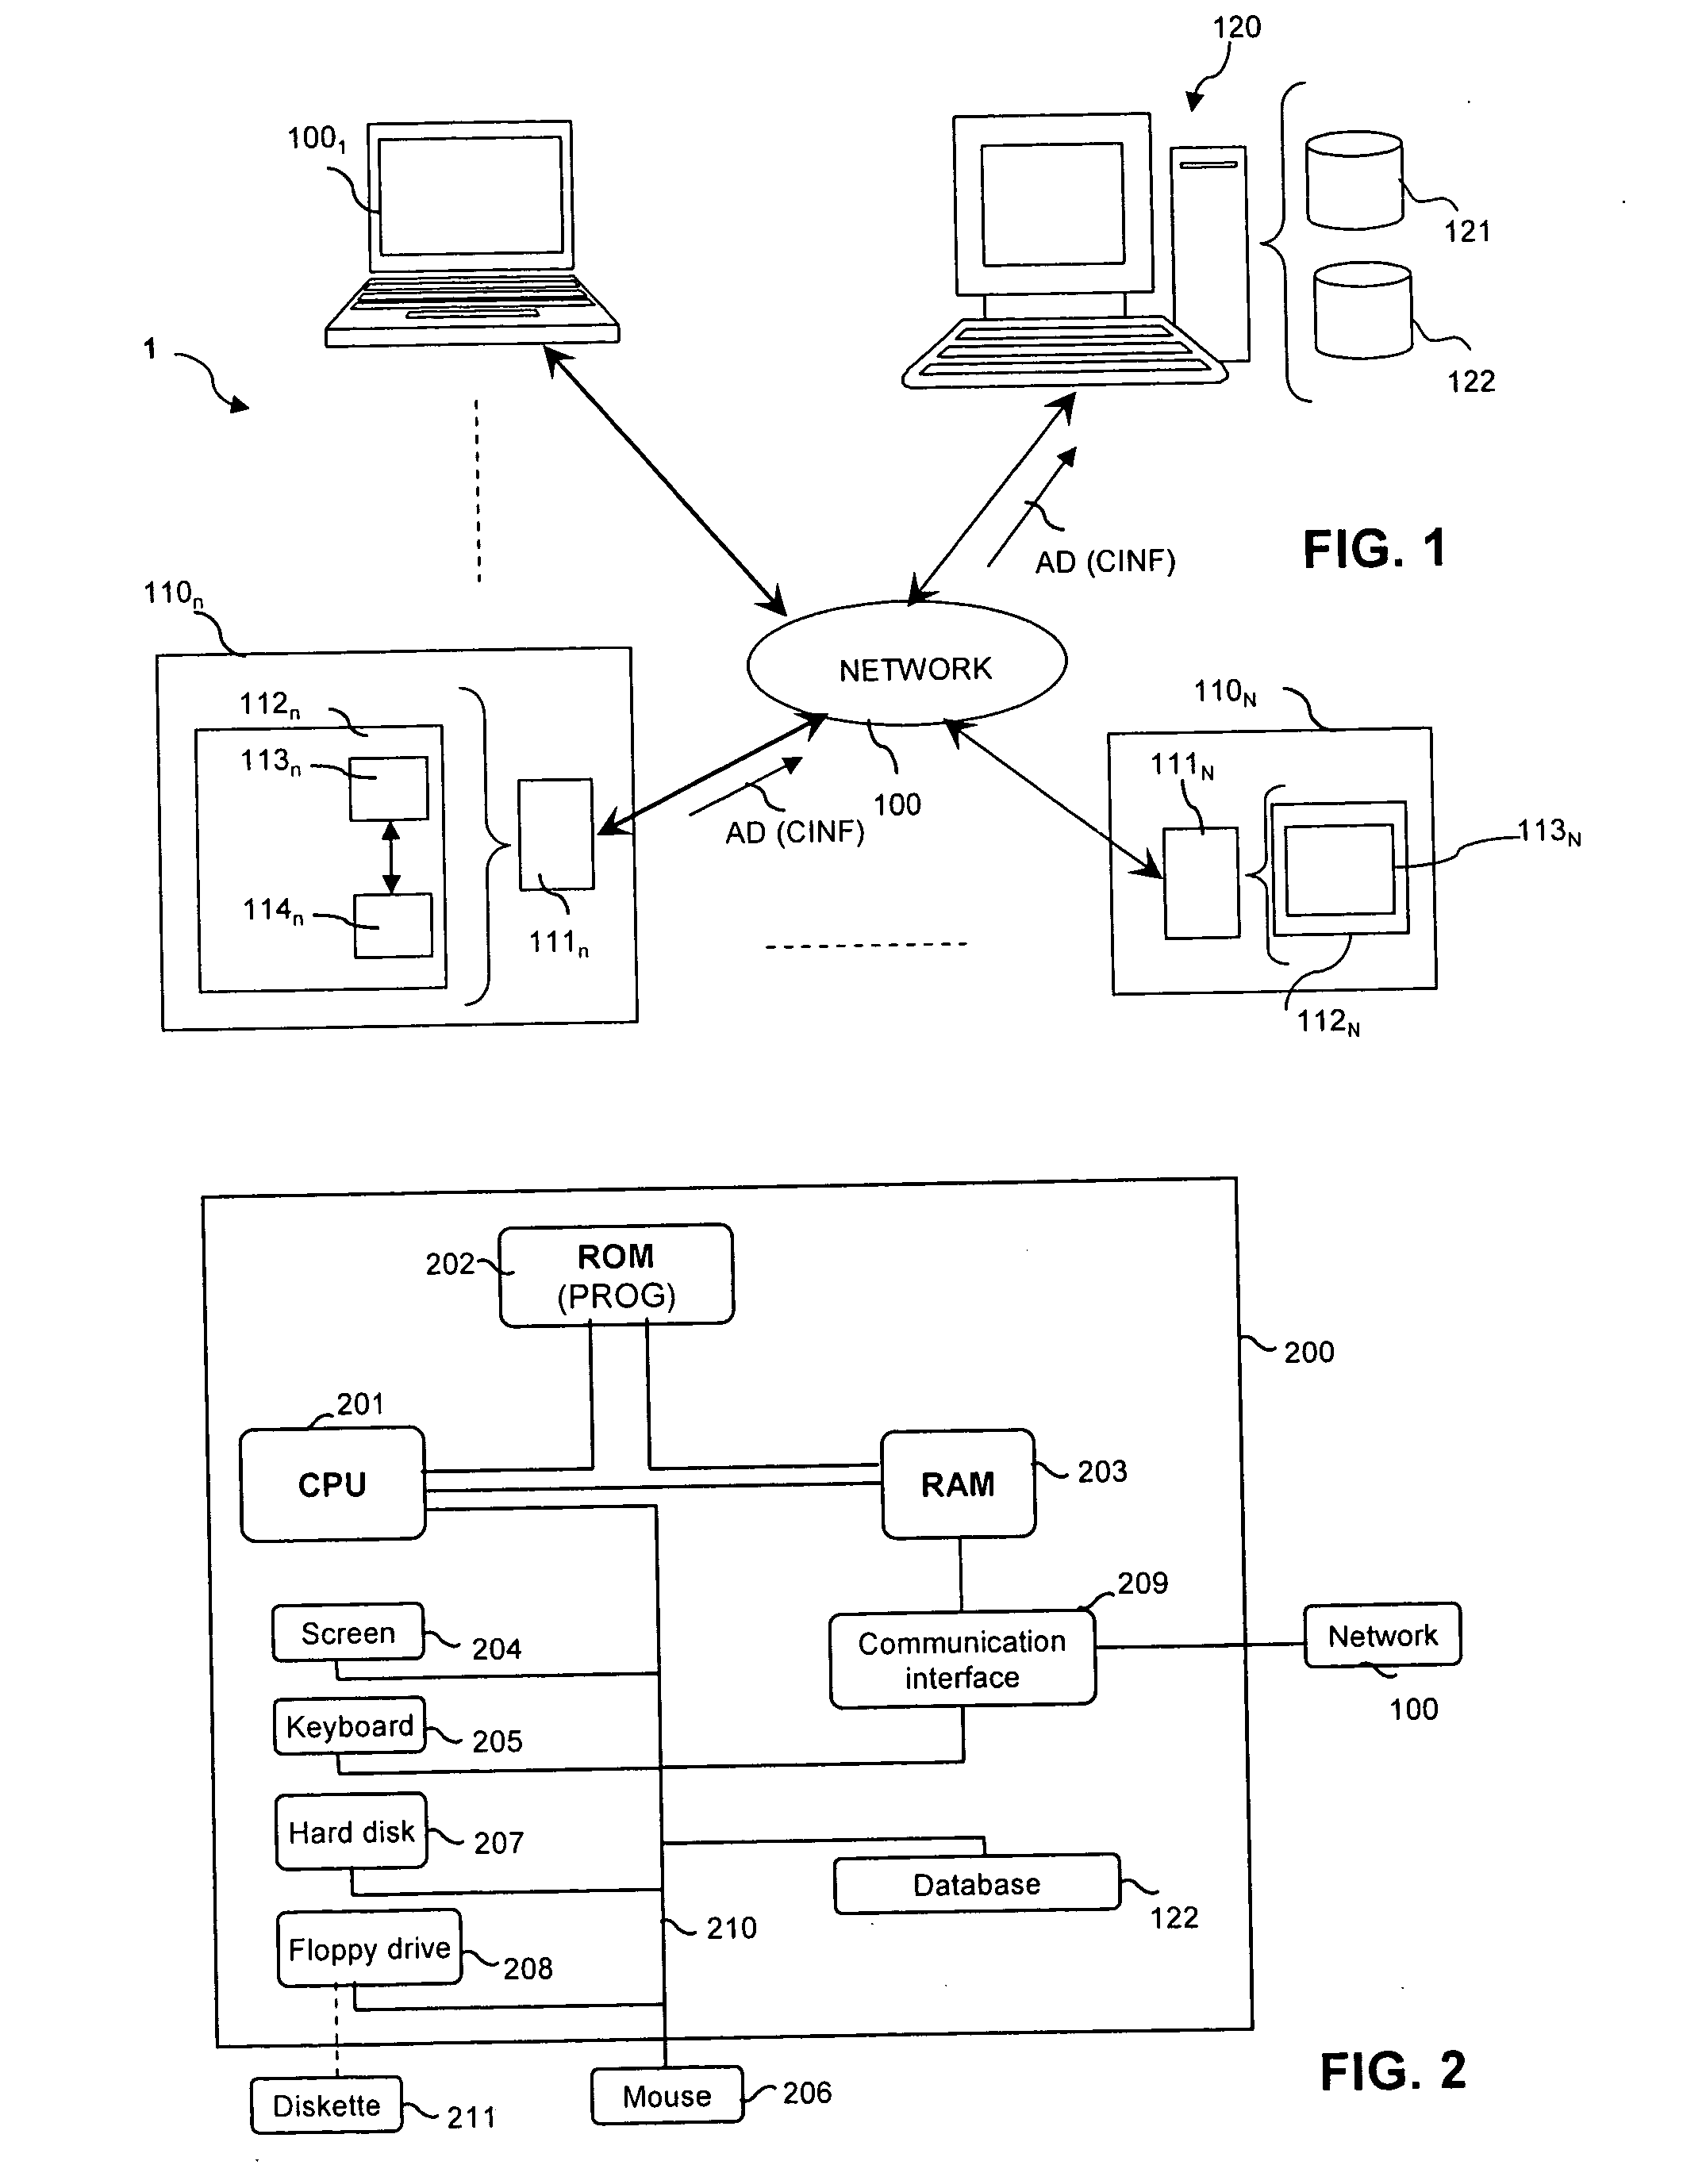 Methods and devices for the asynchronous delivery of digital data